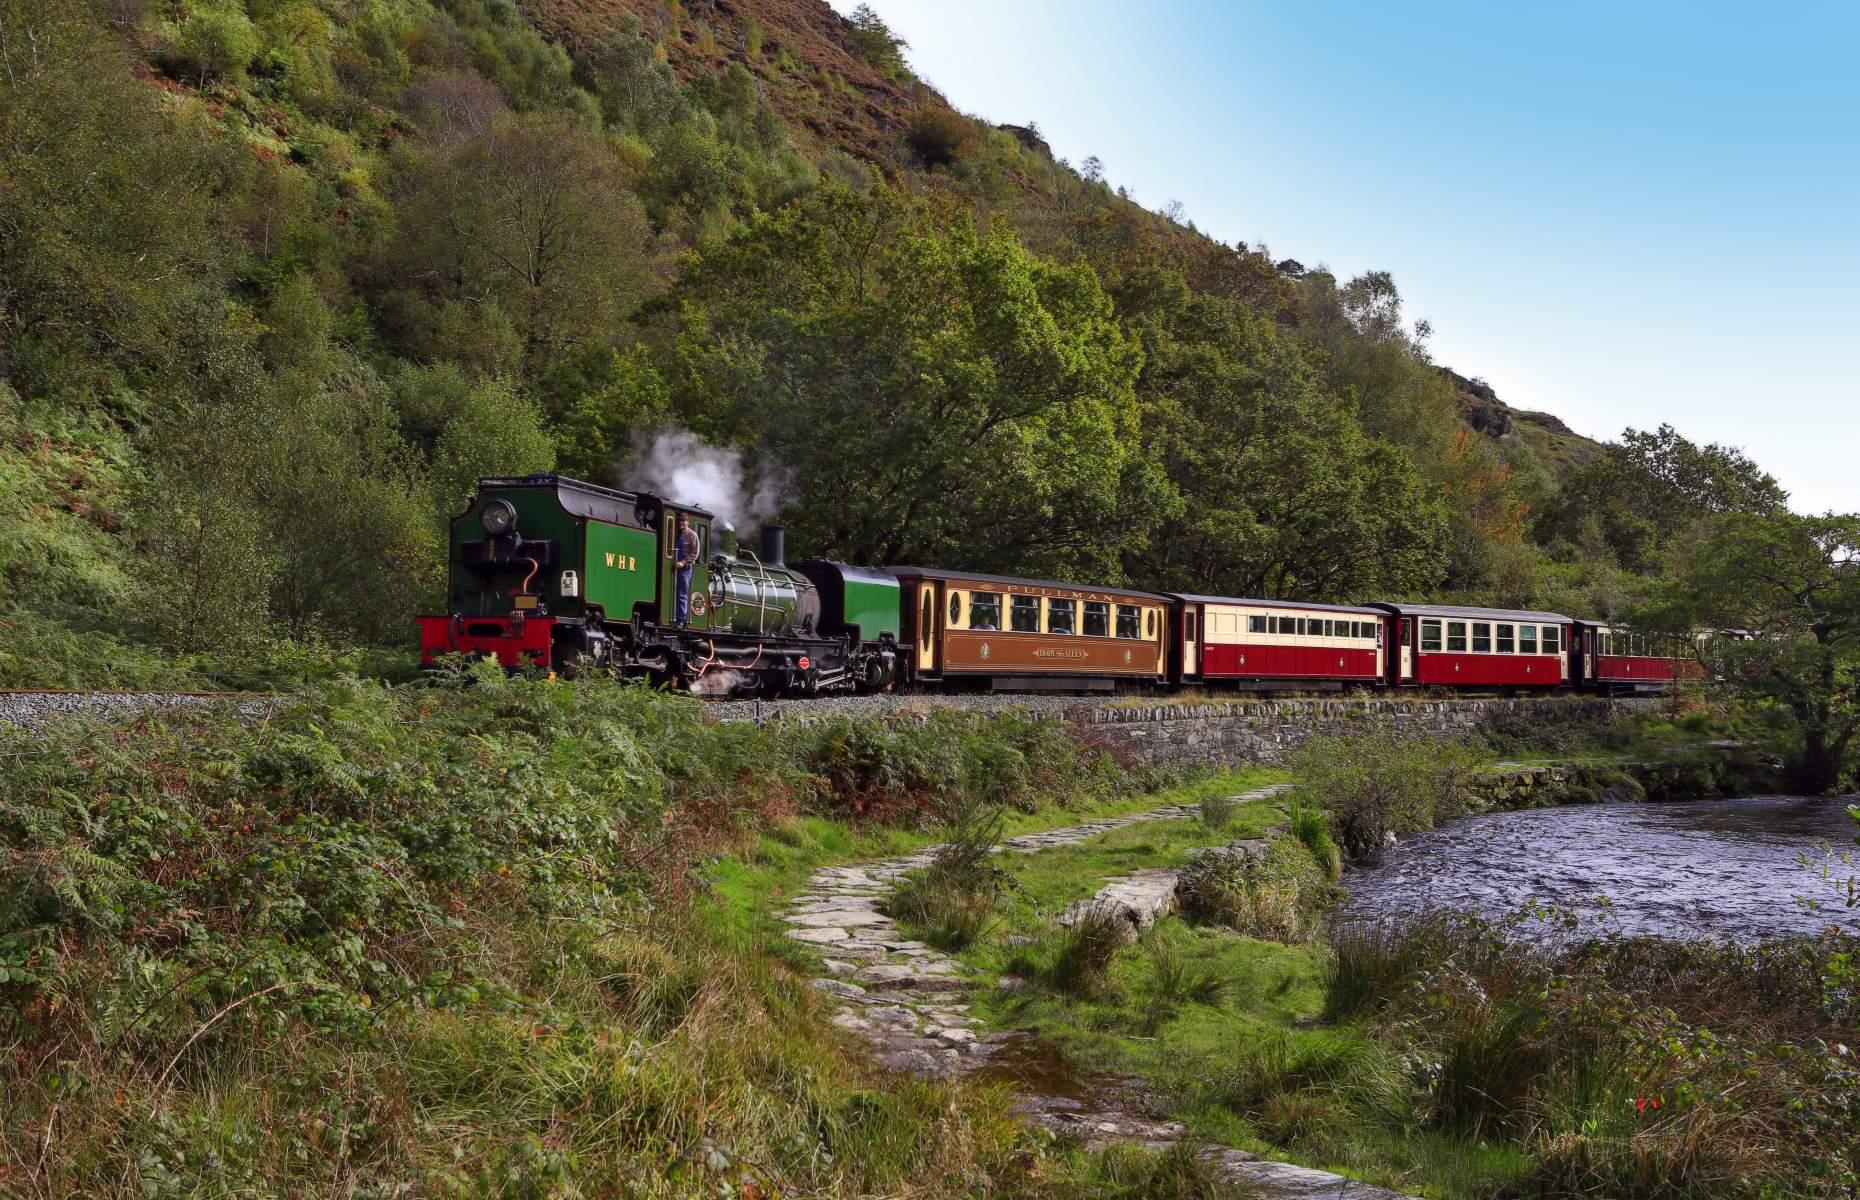 <p>Winding 25 miles (40km) across Snowdonia, the <a href="https://www.festrail.co.uk/">Welsh Highland Railway</a> is the longest heritage railway in the UK. Passing the foot of Snowdon from Caernarfon, the train cuts through the gorgeous Aberglaslyn Pass before arriving at Porthmadog on the Welsh coast where it shares a track gauge with the Ffestiniog Railway.</p>  <p><a href="https://www.loveexploring.com/gallerylist/64254/30-reasons-to-love-wales"><strong>Discover 30 reasons to love Wales</strong></a></p>